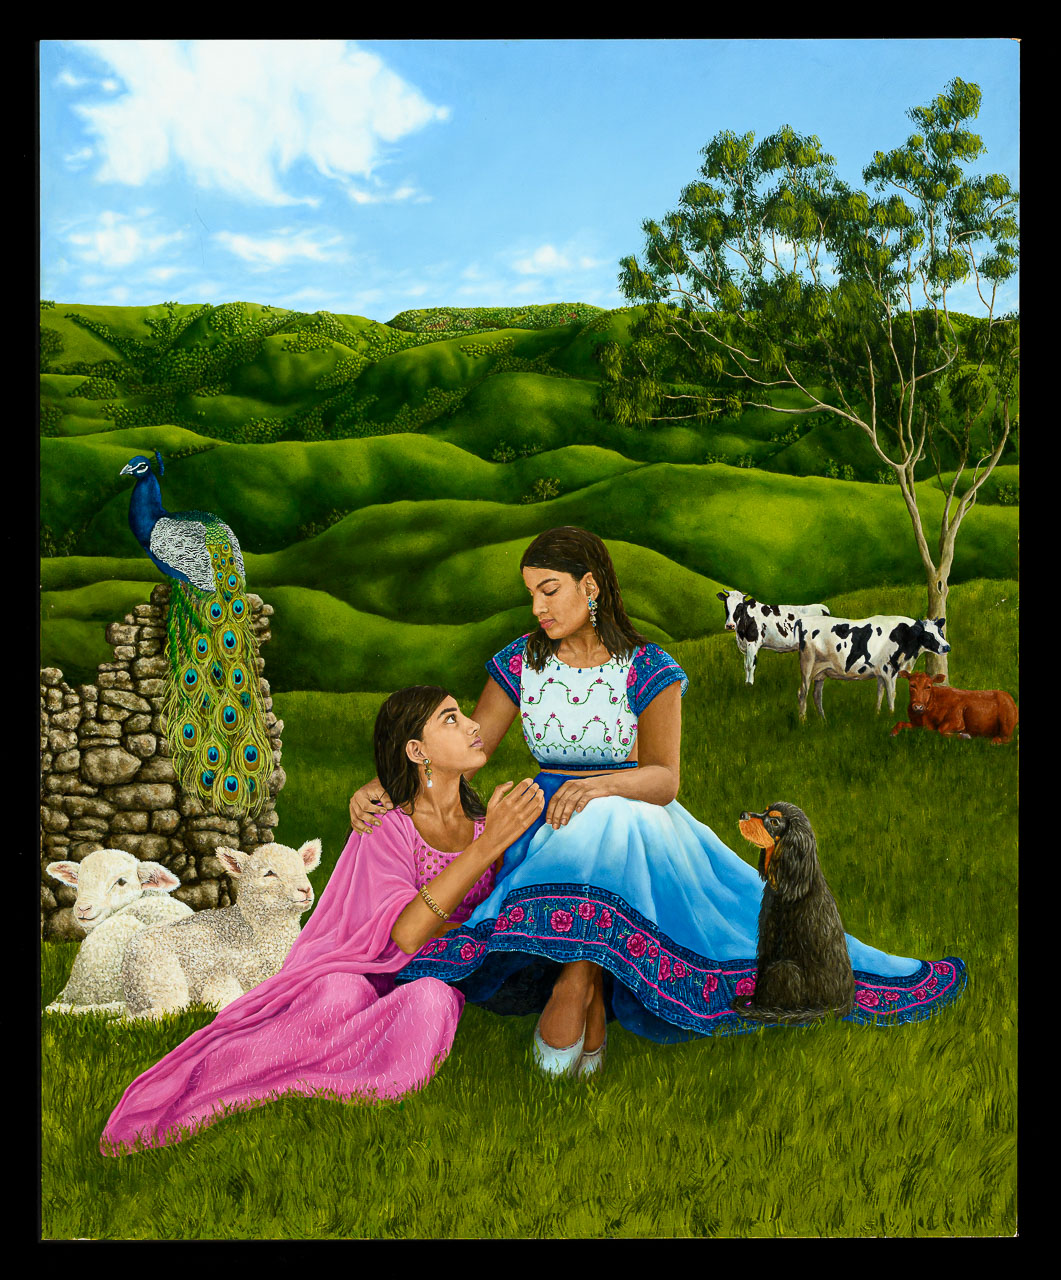 Two female figures sitting in a green field surrounded by farm animals. the figures are south Asian and are wearing traditional dress.